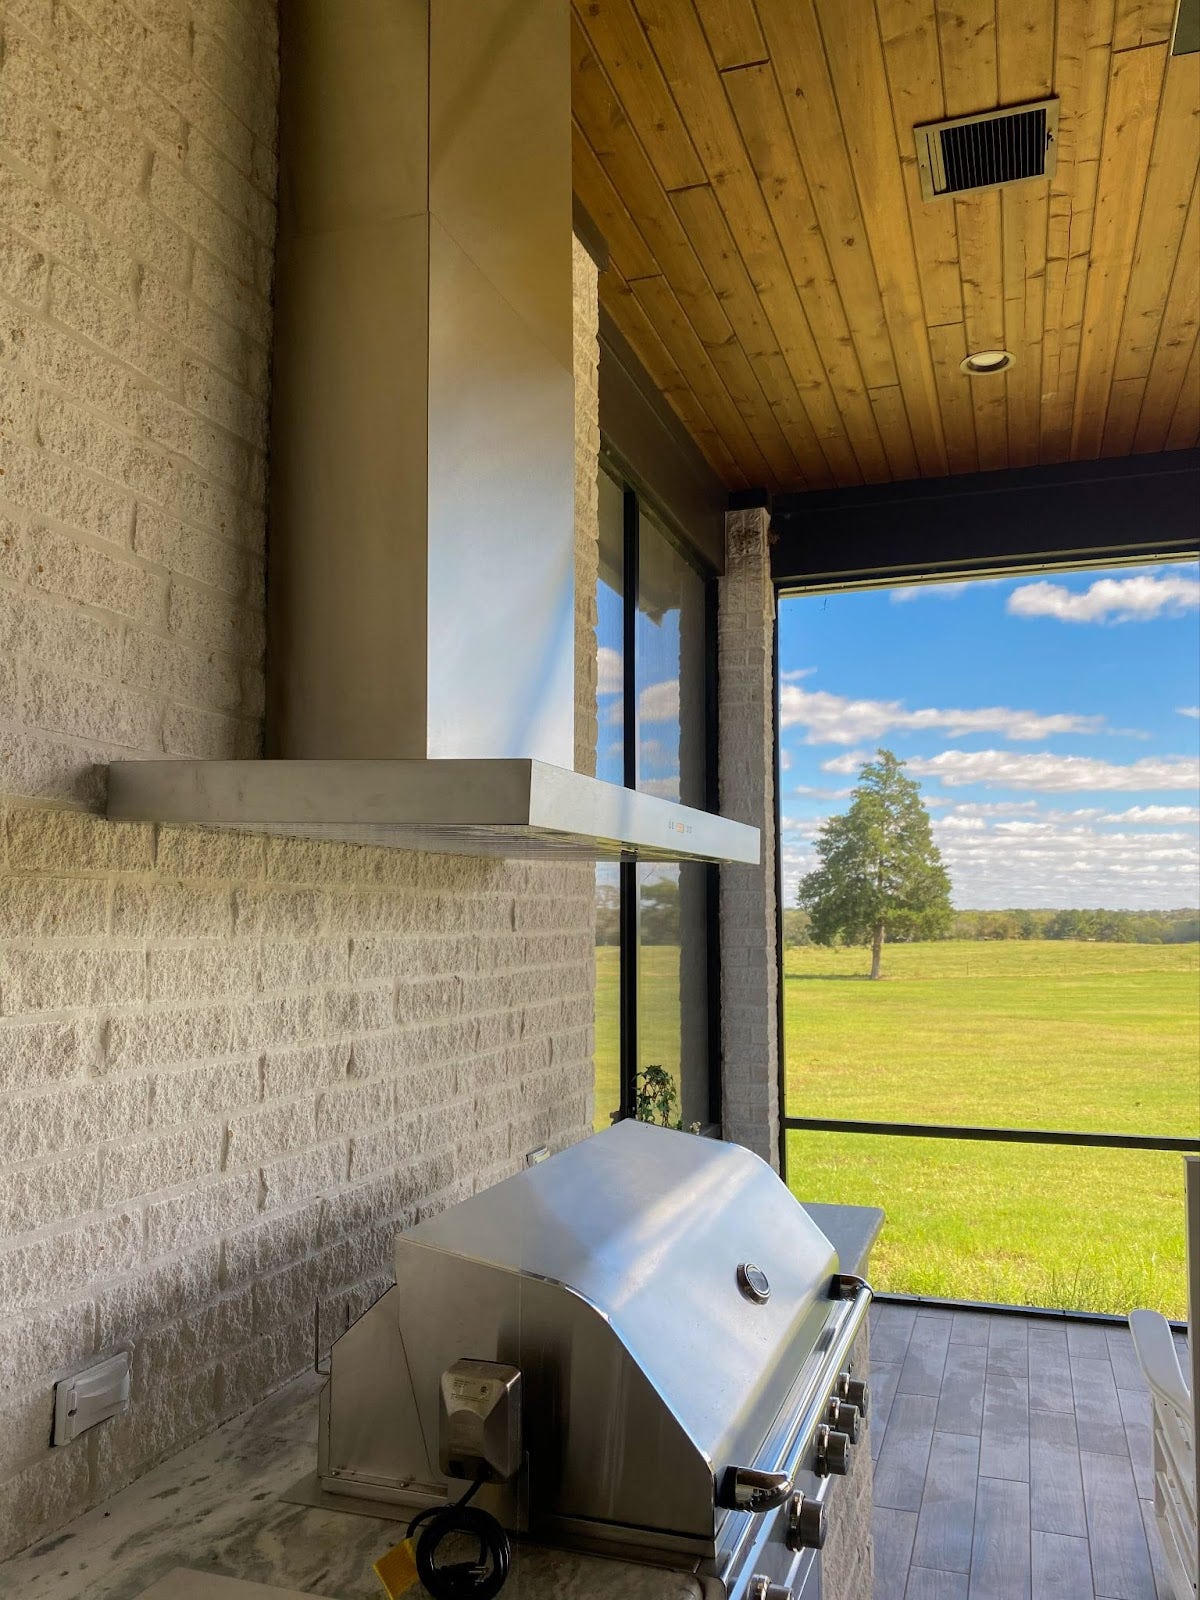 Inviting outdoor kitchen featuring a modern Proline range hood, stainless steel grill, and tranquil views of green fields under a wooden ceiling - prolinerangehoods.com